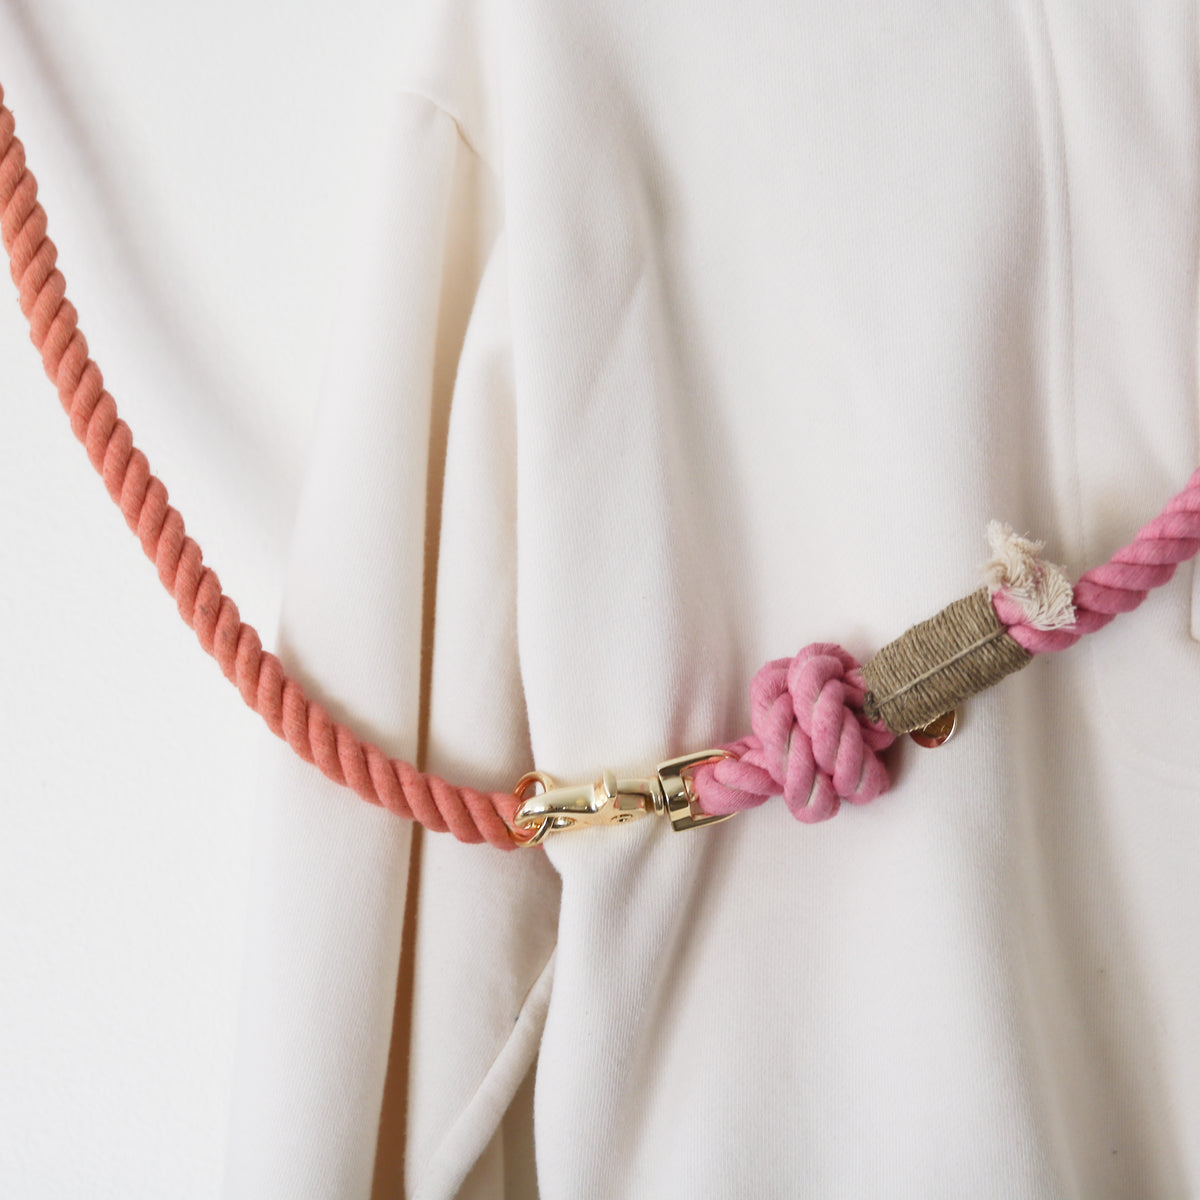 'Lucky Charms' - Hands Free Rope Leash - FURLOU 